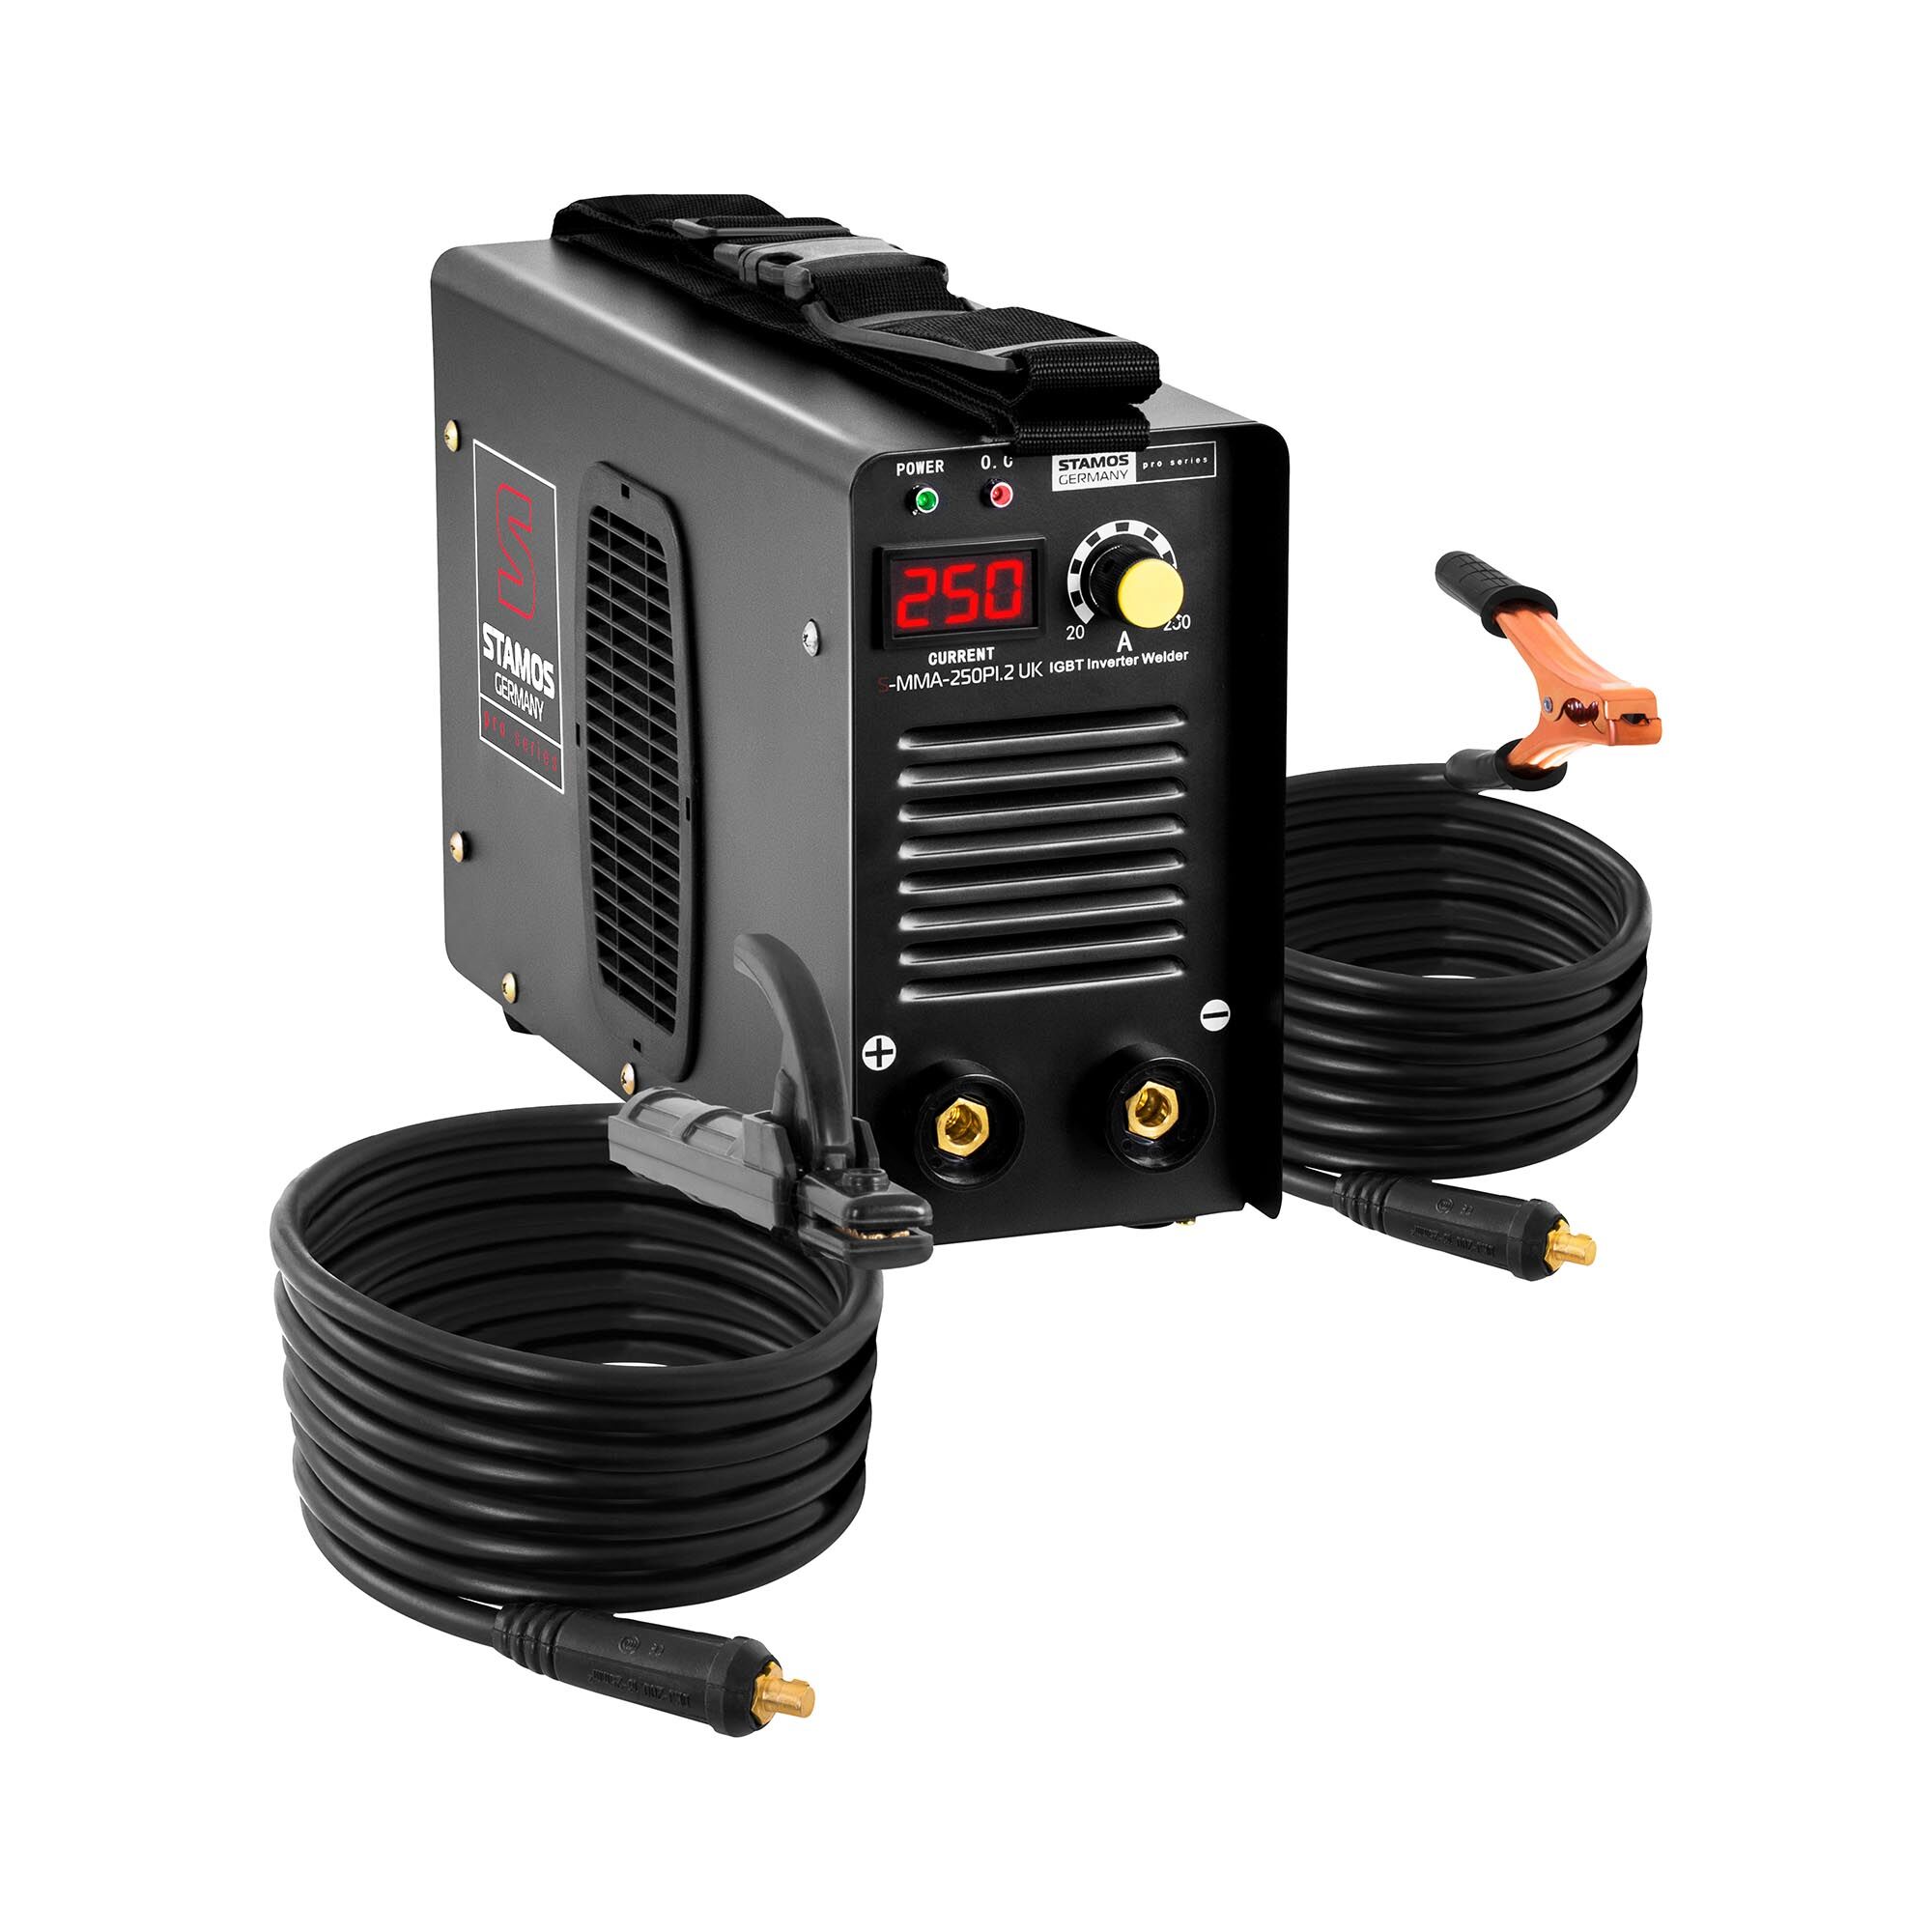 Stamos Pro Series Electrode welder - 250 A - 8 m cable - Hot Start - PRO